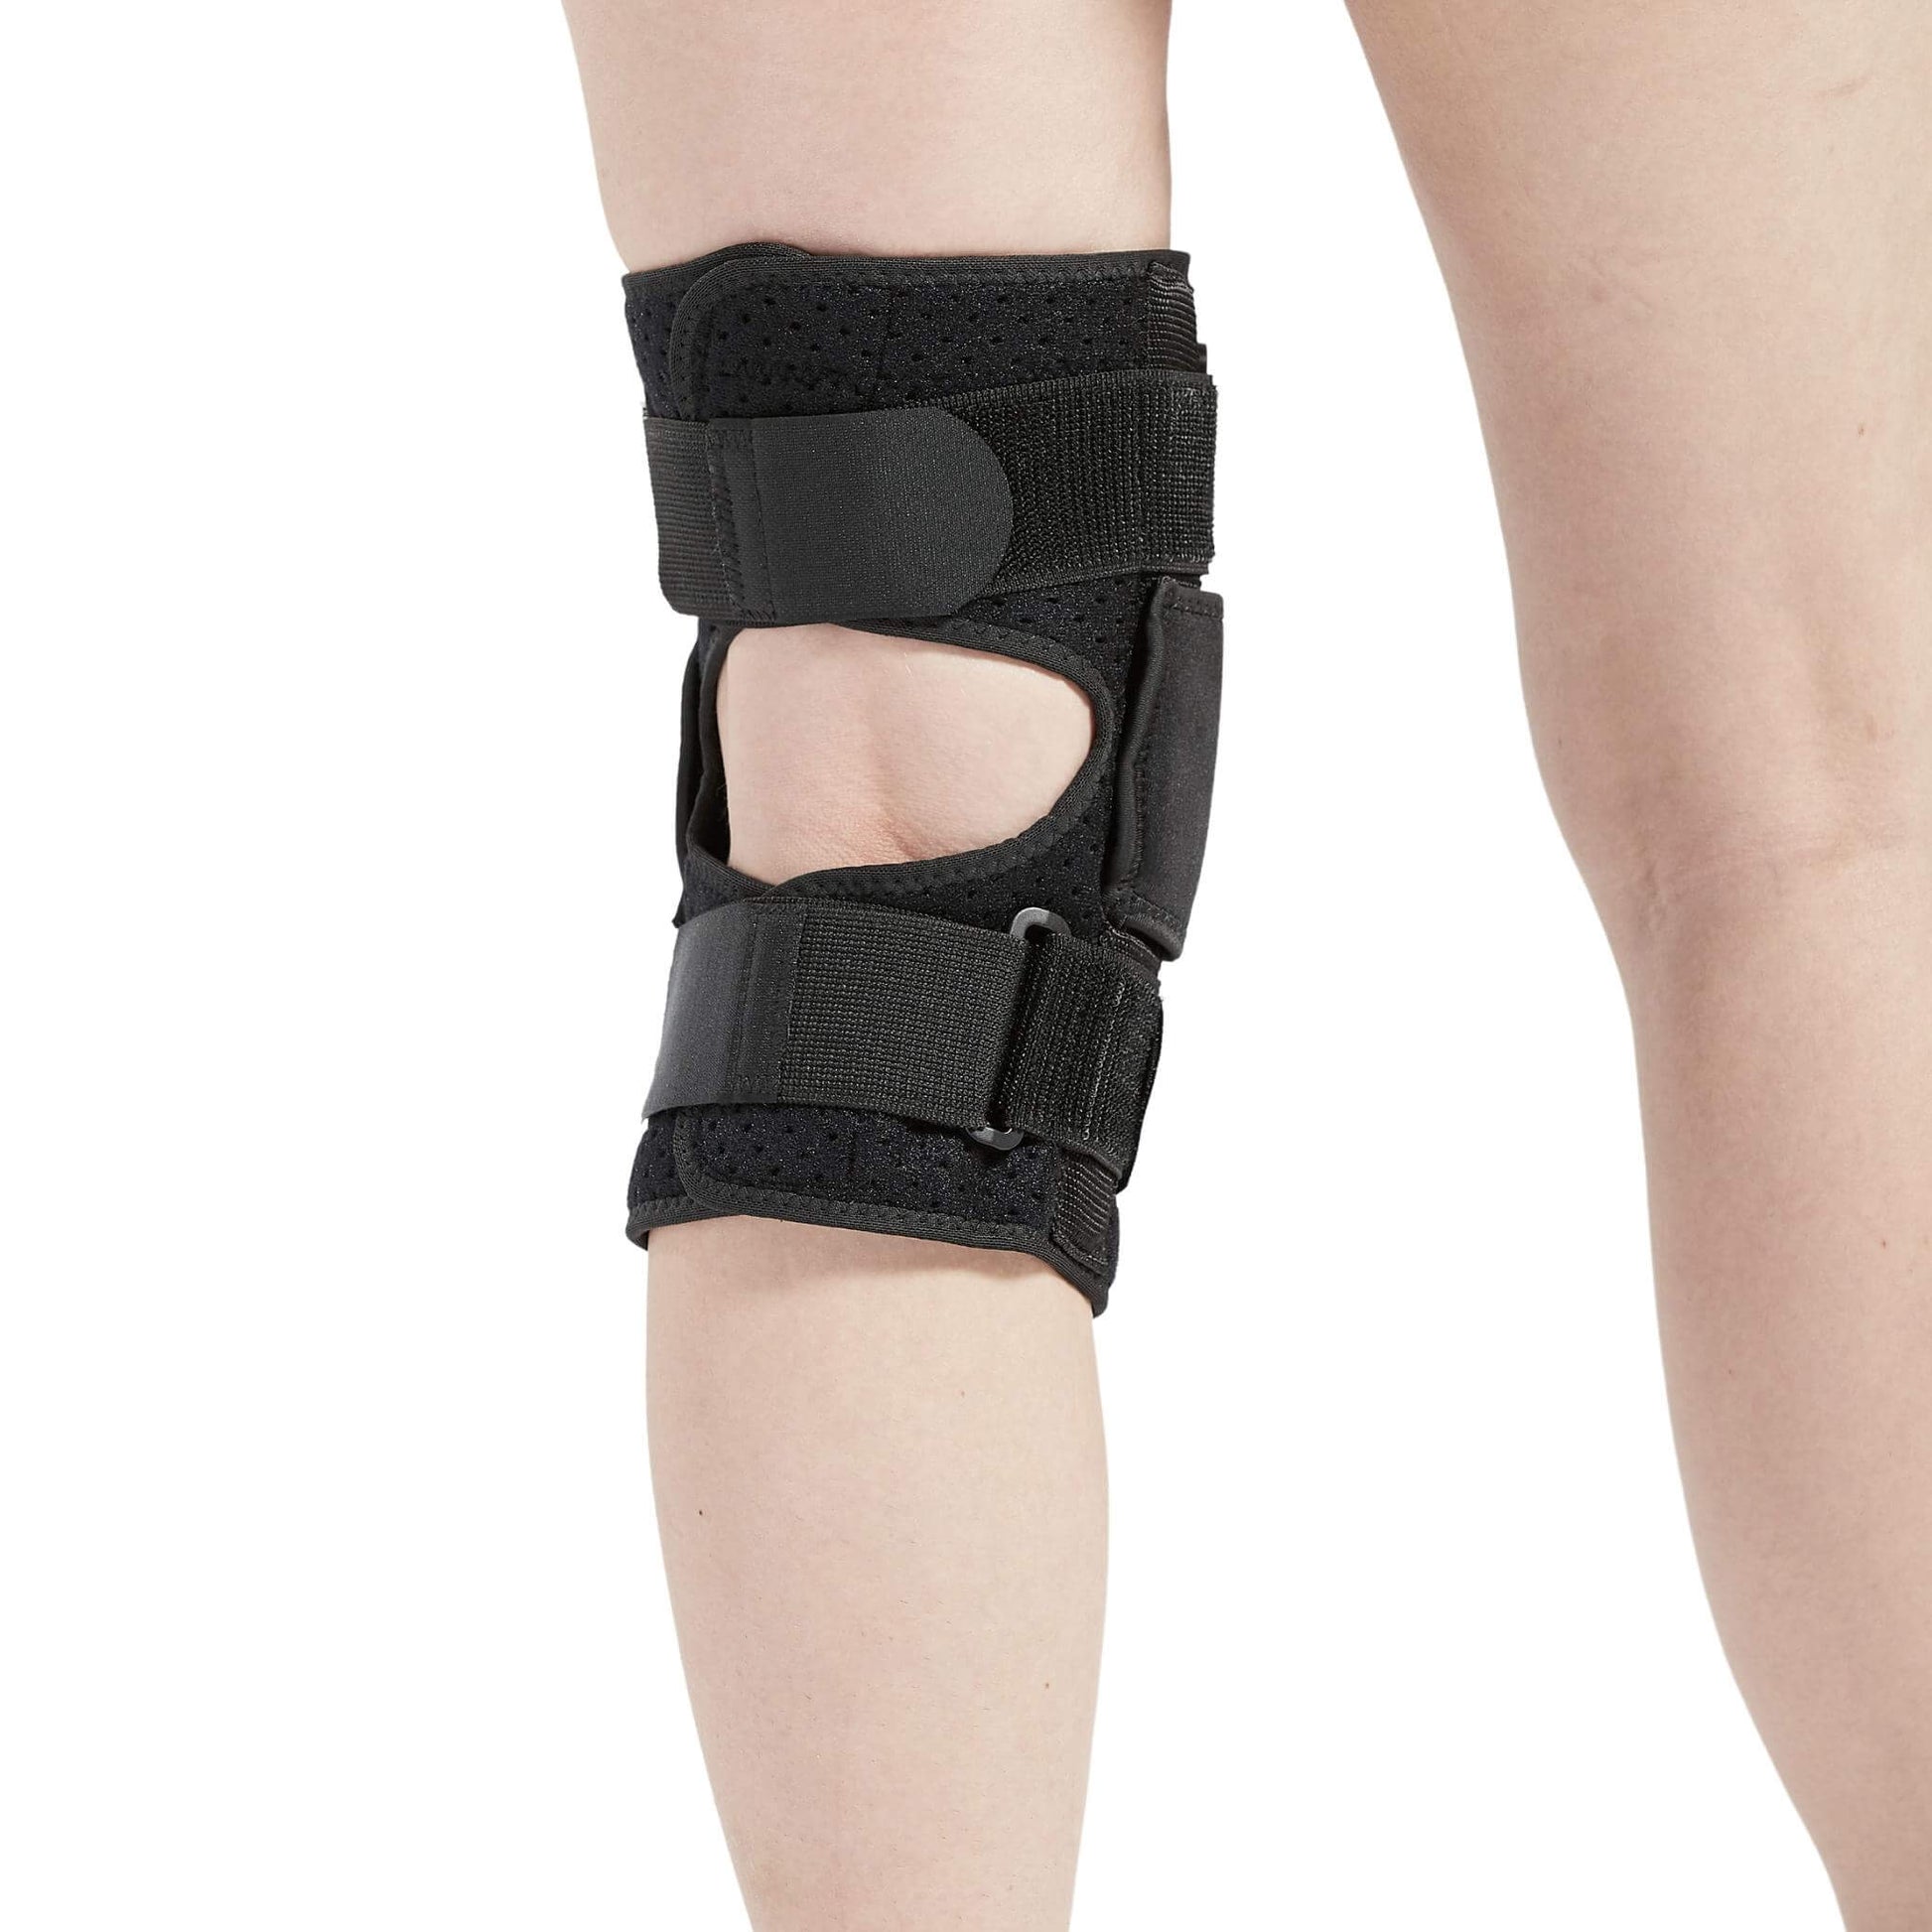 Hinged Knee Brace  Knee Support for Swollen ACL, Tendon, Ligament